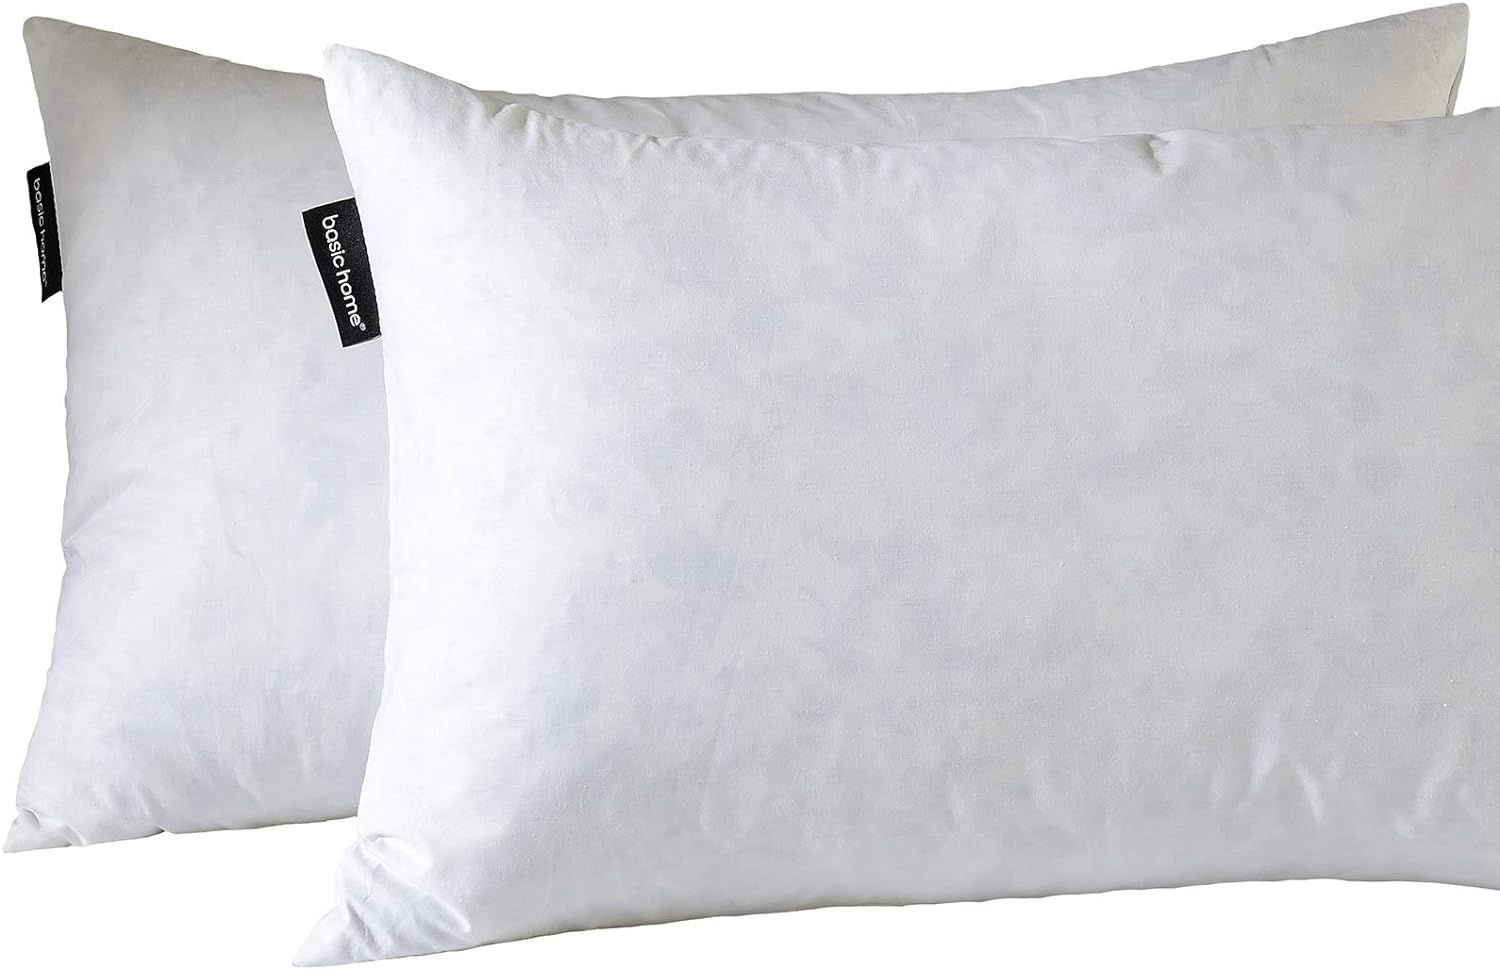 16X26 Oblong Feather & Down Pillow Insert, 100% Cotton Fabric, Set of 2, White | Amazon (US)